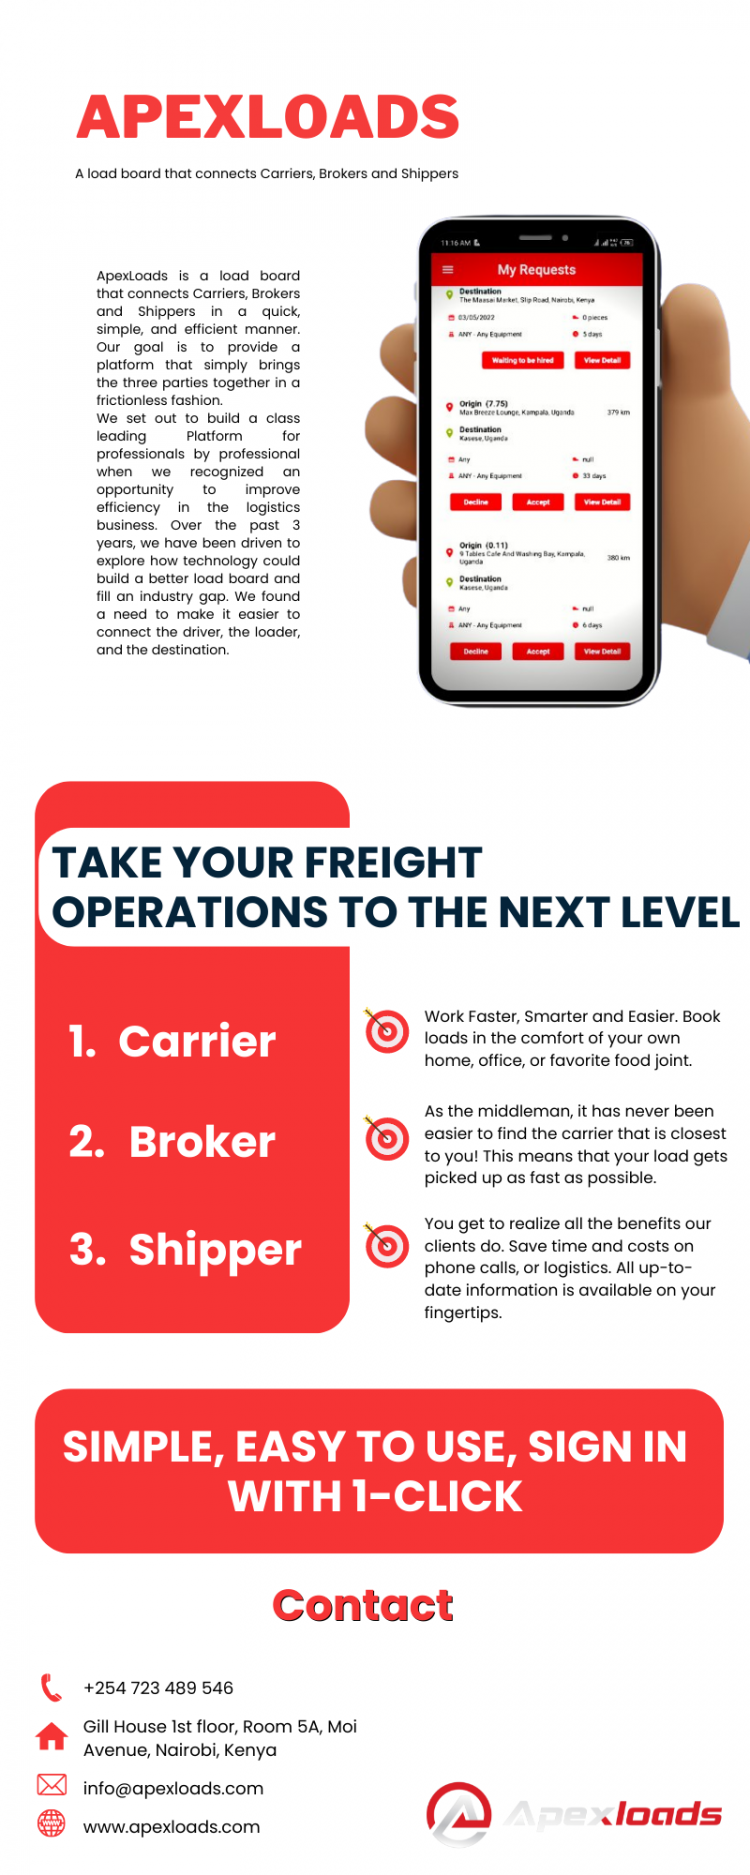 Apexloads is a load board that connects Carriers, Brokers and Shippers in a quick, simple, and efficient manner. Our goal is to provide a platform that simply brings the three parties together in a frictionless fashion.

https://apexloads.com/